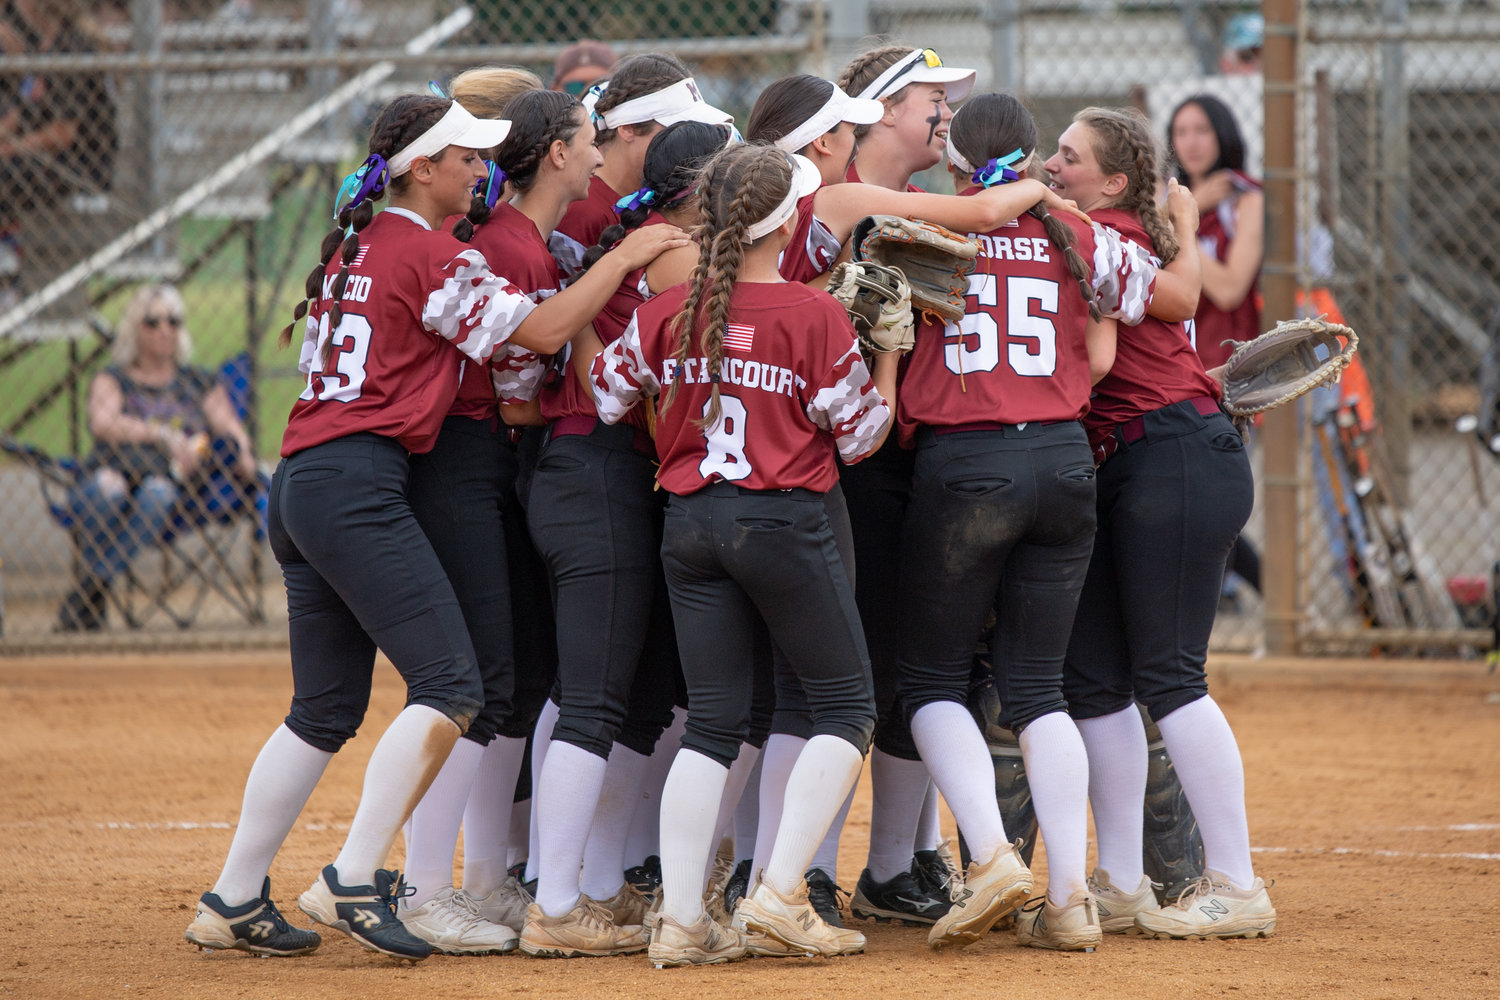 Mepham added to its softball dynasty Sunday with a third straight Nassau Class A title, sweeping neighboring Calhoun in the best-of-three championship series.